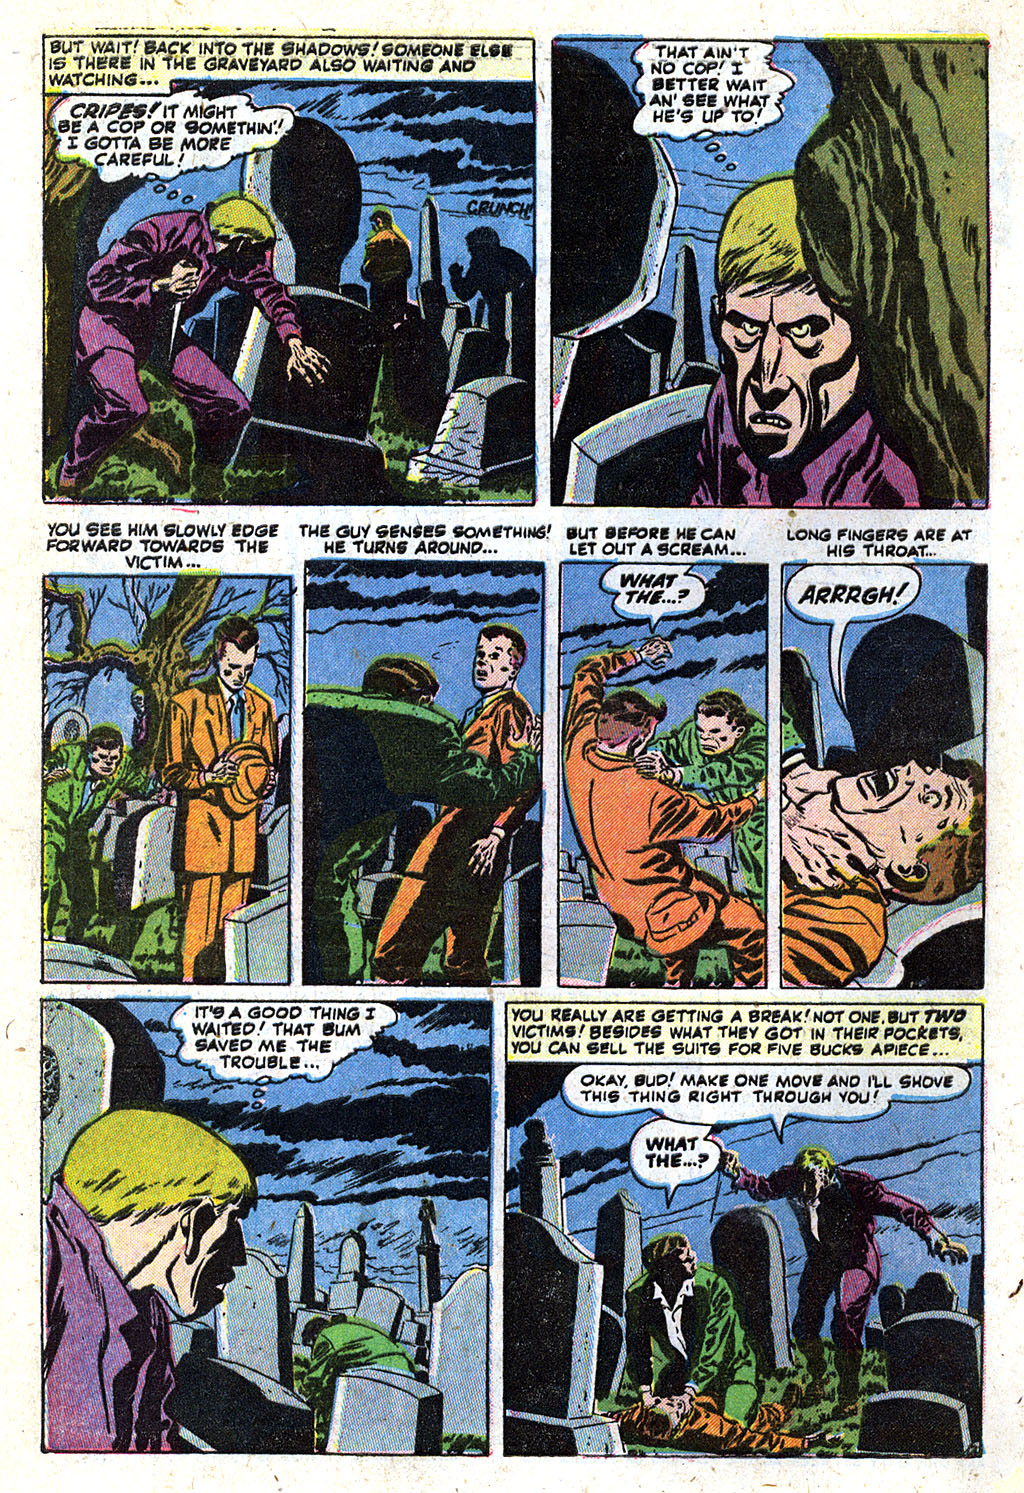 Marvel Tales (1949) 107 Page 3